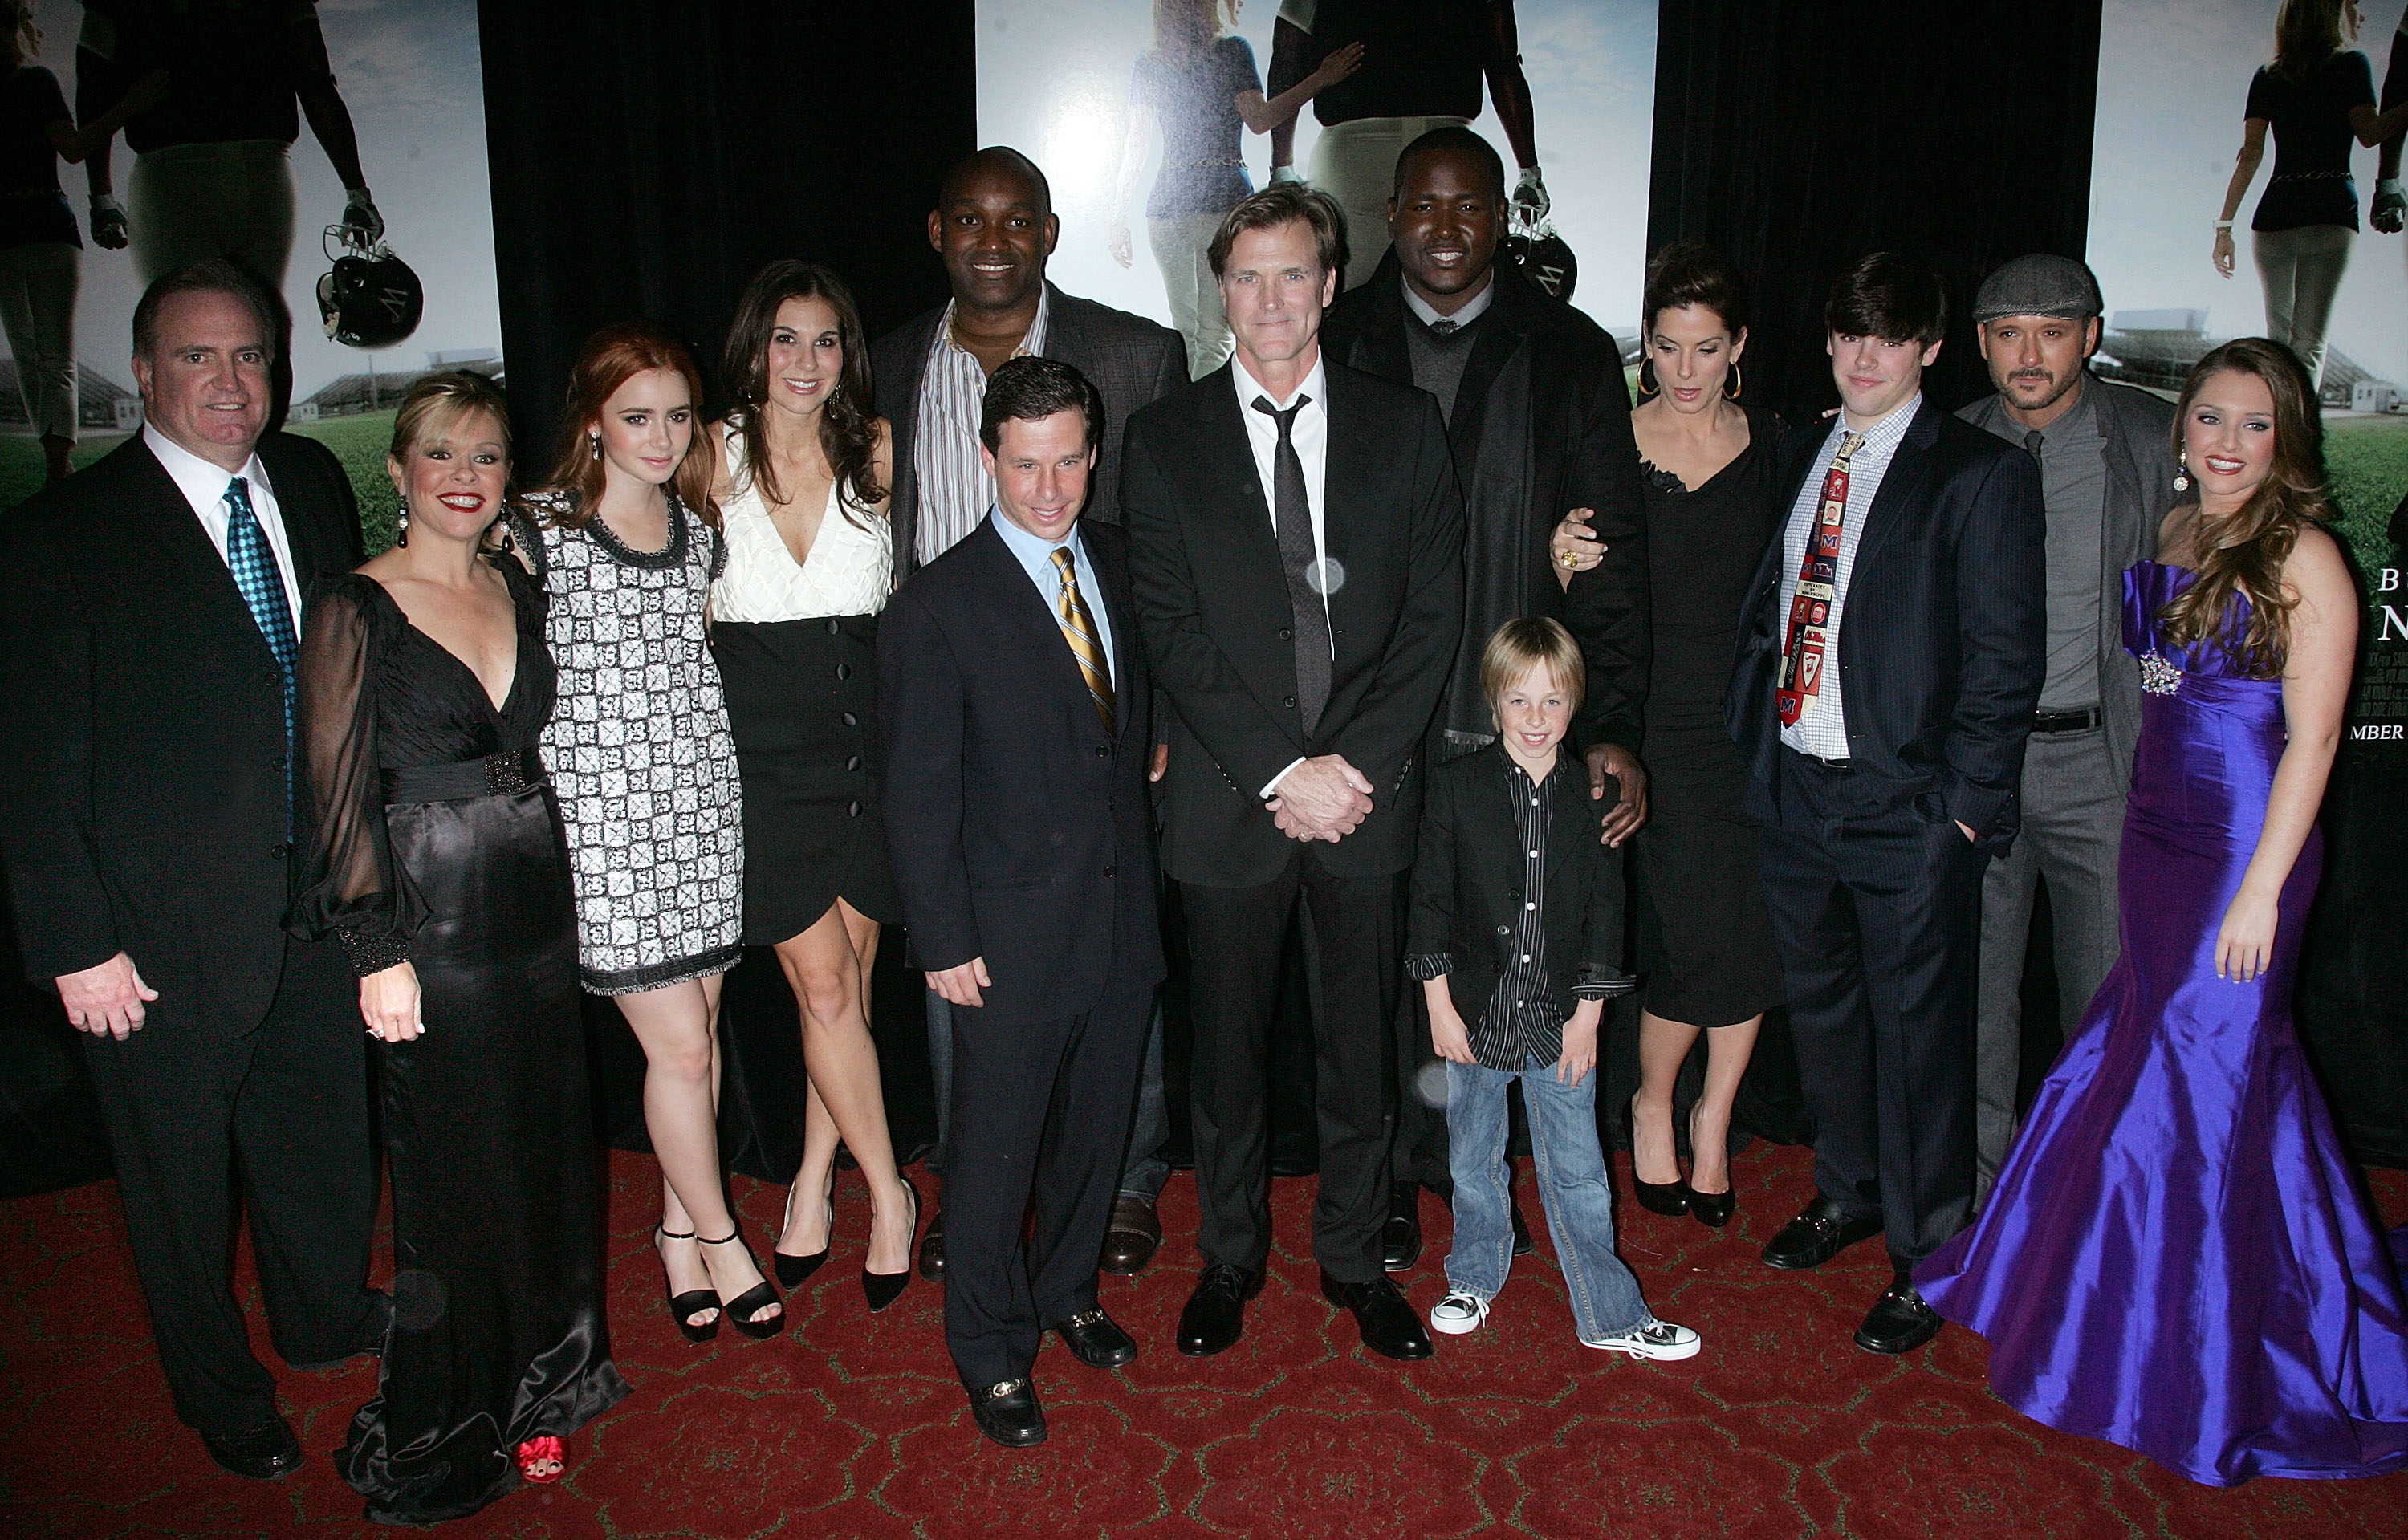 The Tuohy family and cast members of The Blind Side